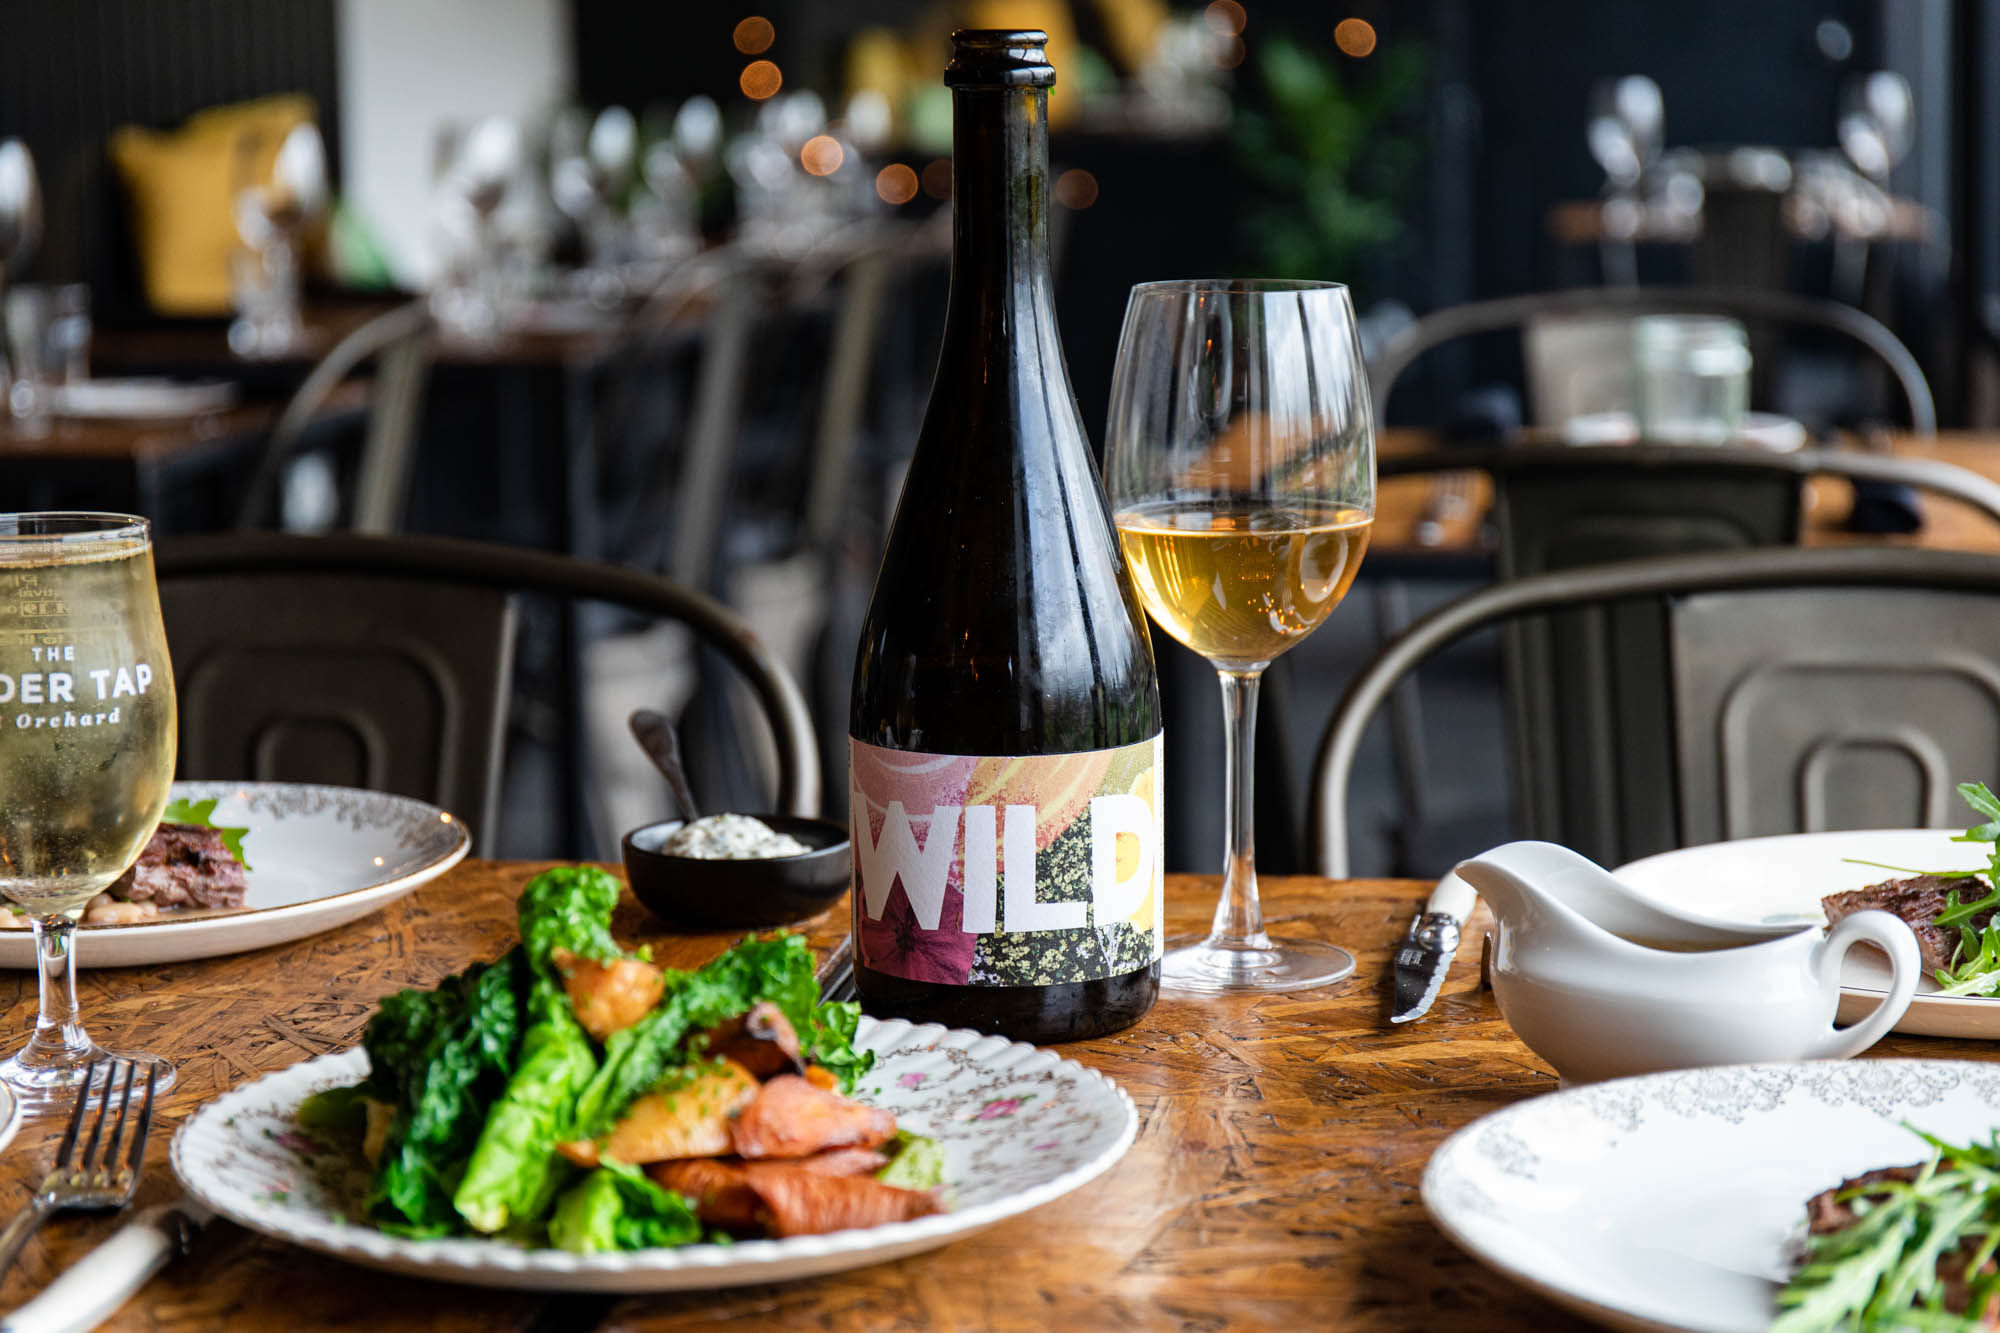 A dark wooden table with a plate of food with seasonal vegetables and a glass cider with the bottle. Inside The Cider Tap Sussex with the rest of the venue out of focus in the background.